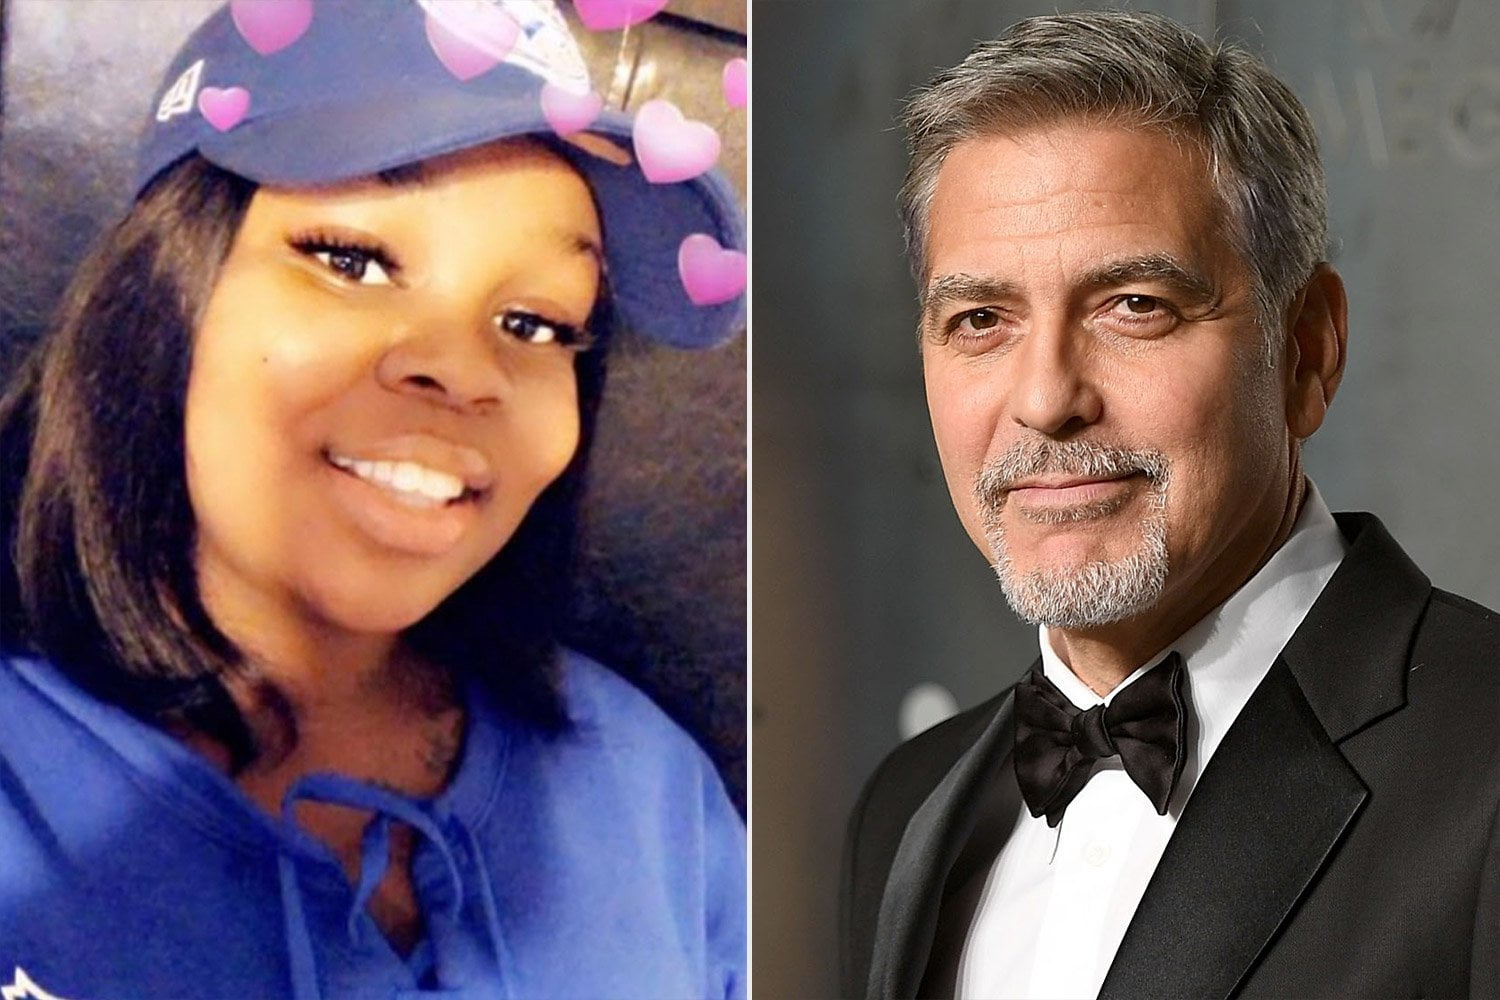 George Clooney And Many More Celebs Slam The No Murder Charges For The Officers Who Killed Breonna Taylor